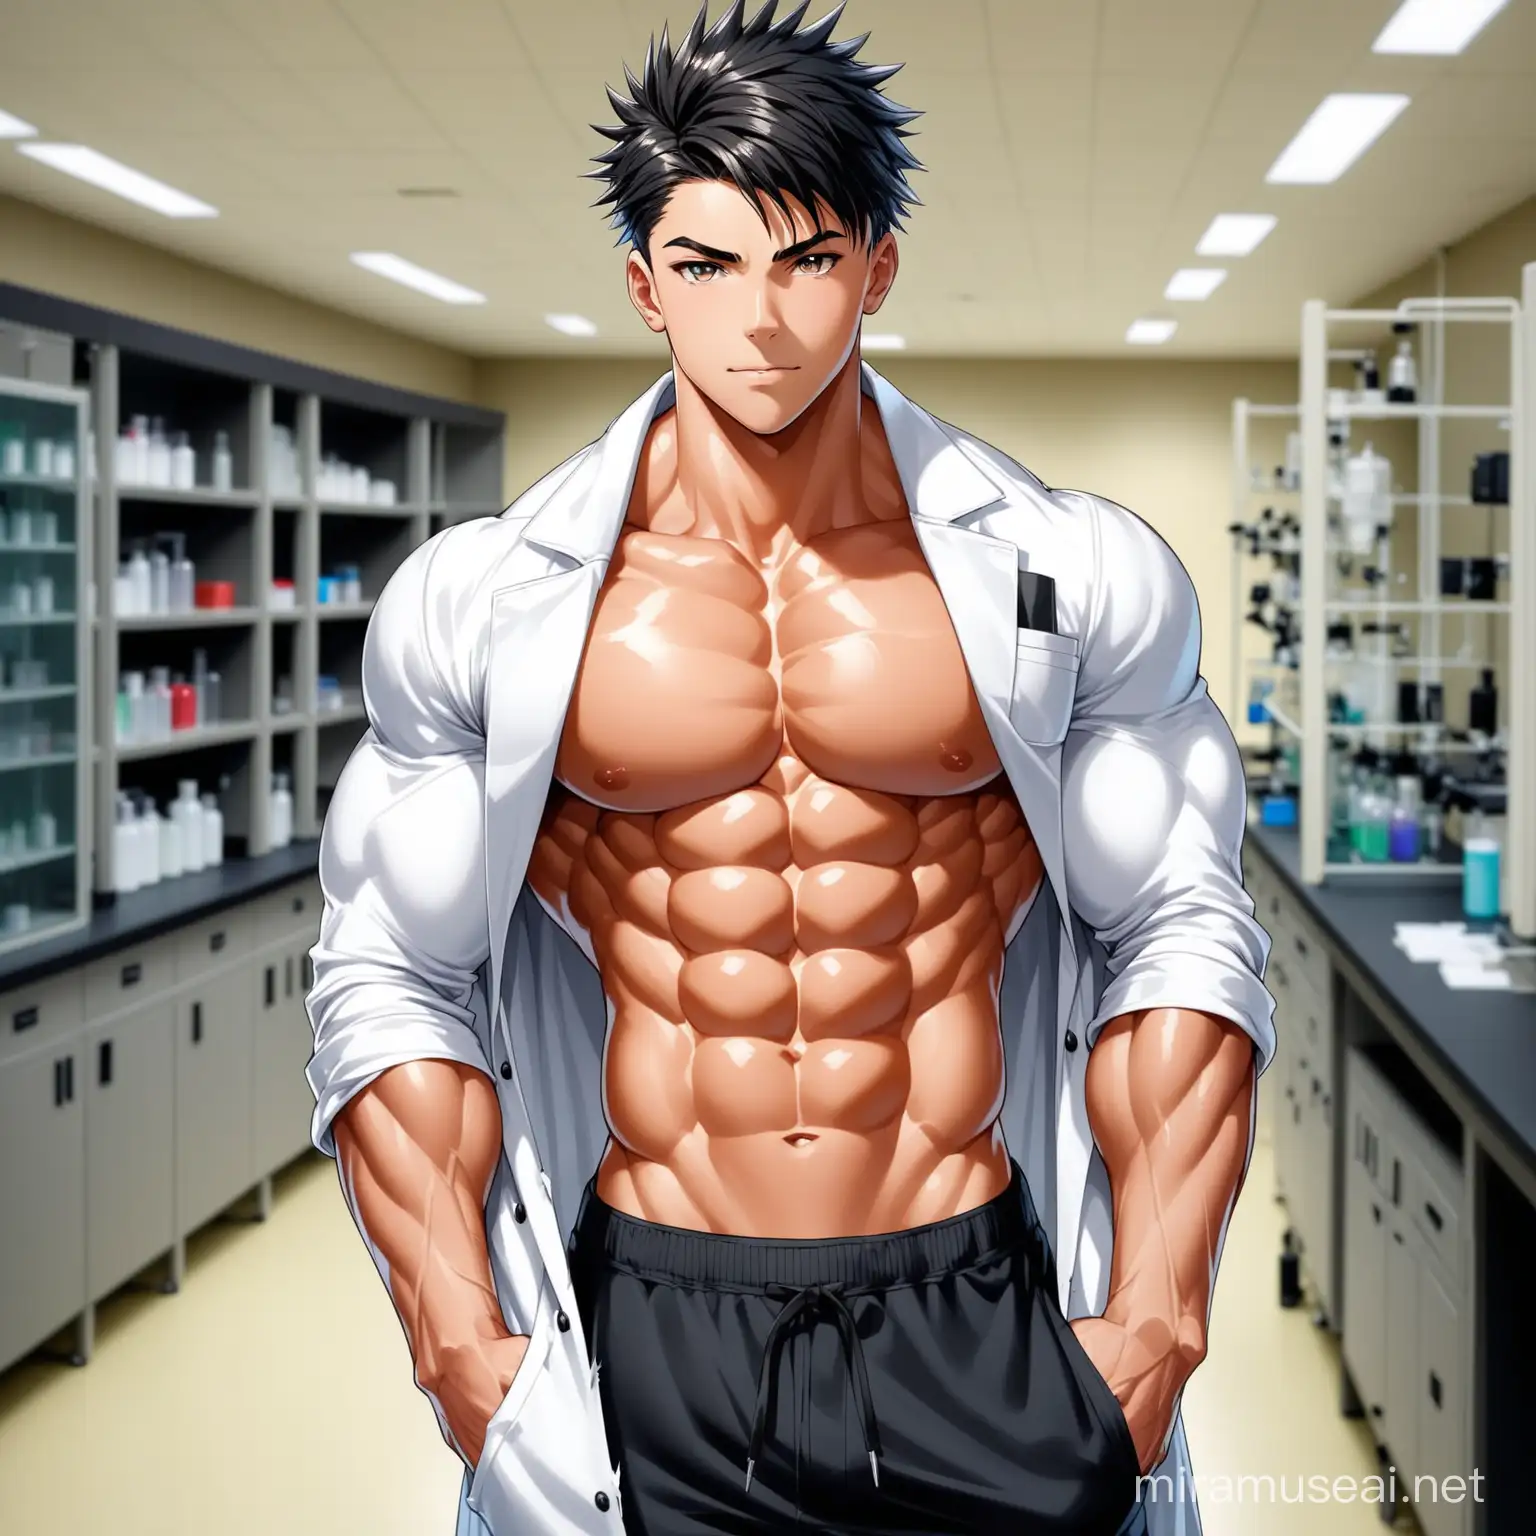 Teen muscle,muscular 16 year old male, black spiky haircut, white wide torn lab coat, lab scenery, 8 pack abs, muscular male body